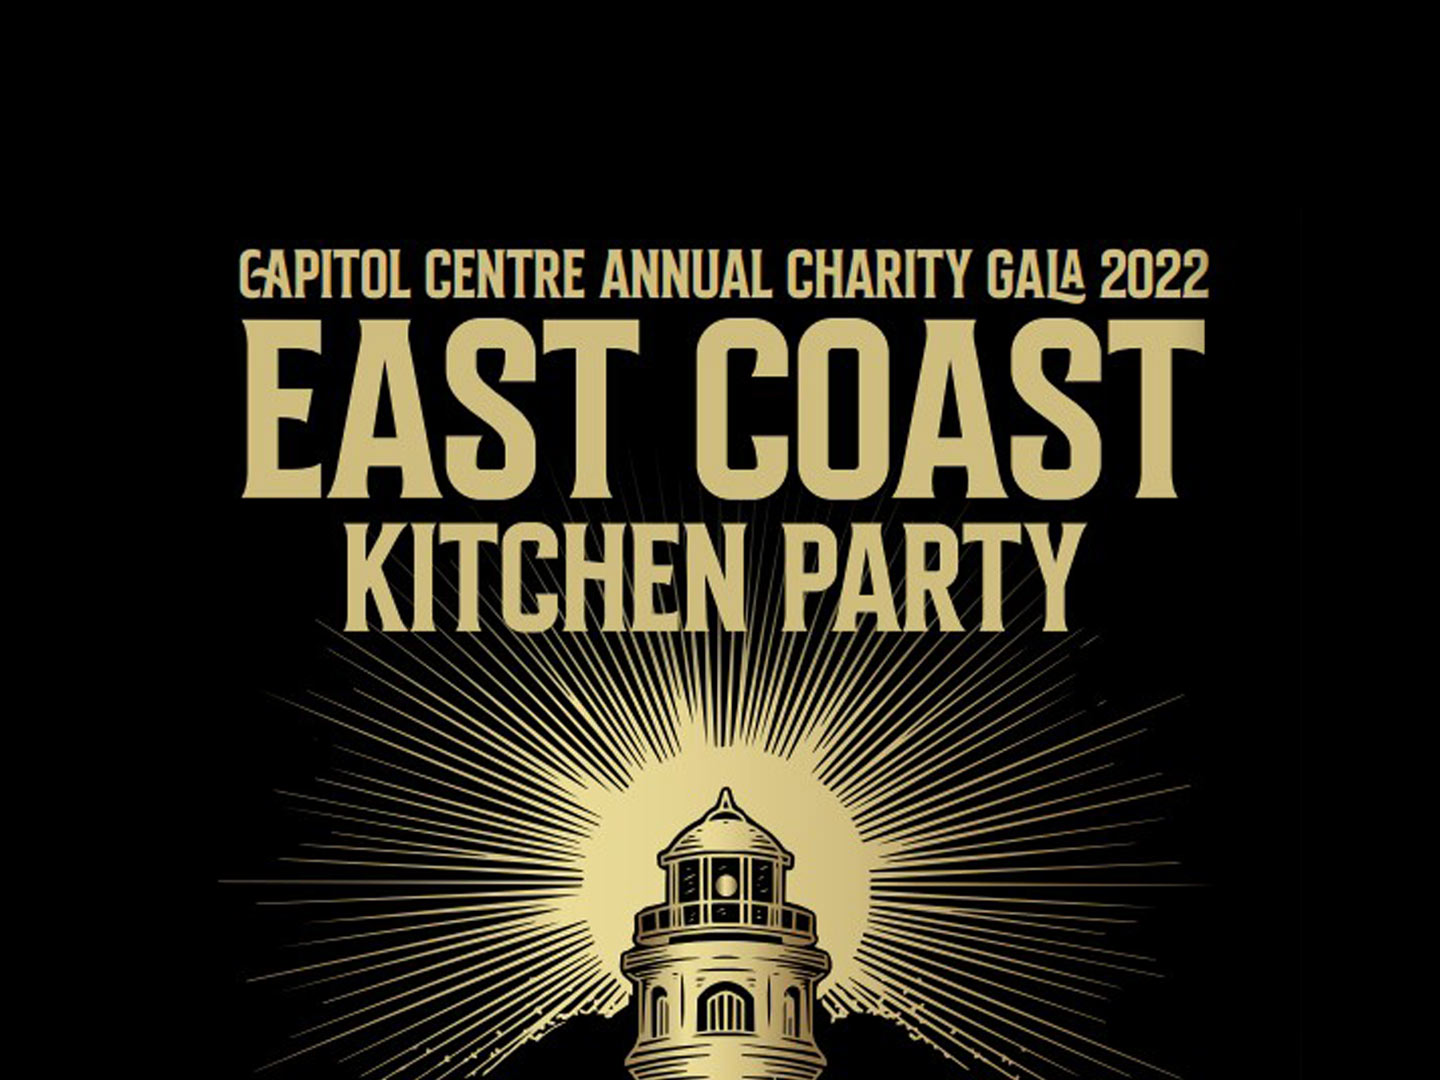 East Coast Kitchen Party Annual Capitol Centre Charity Gala